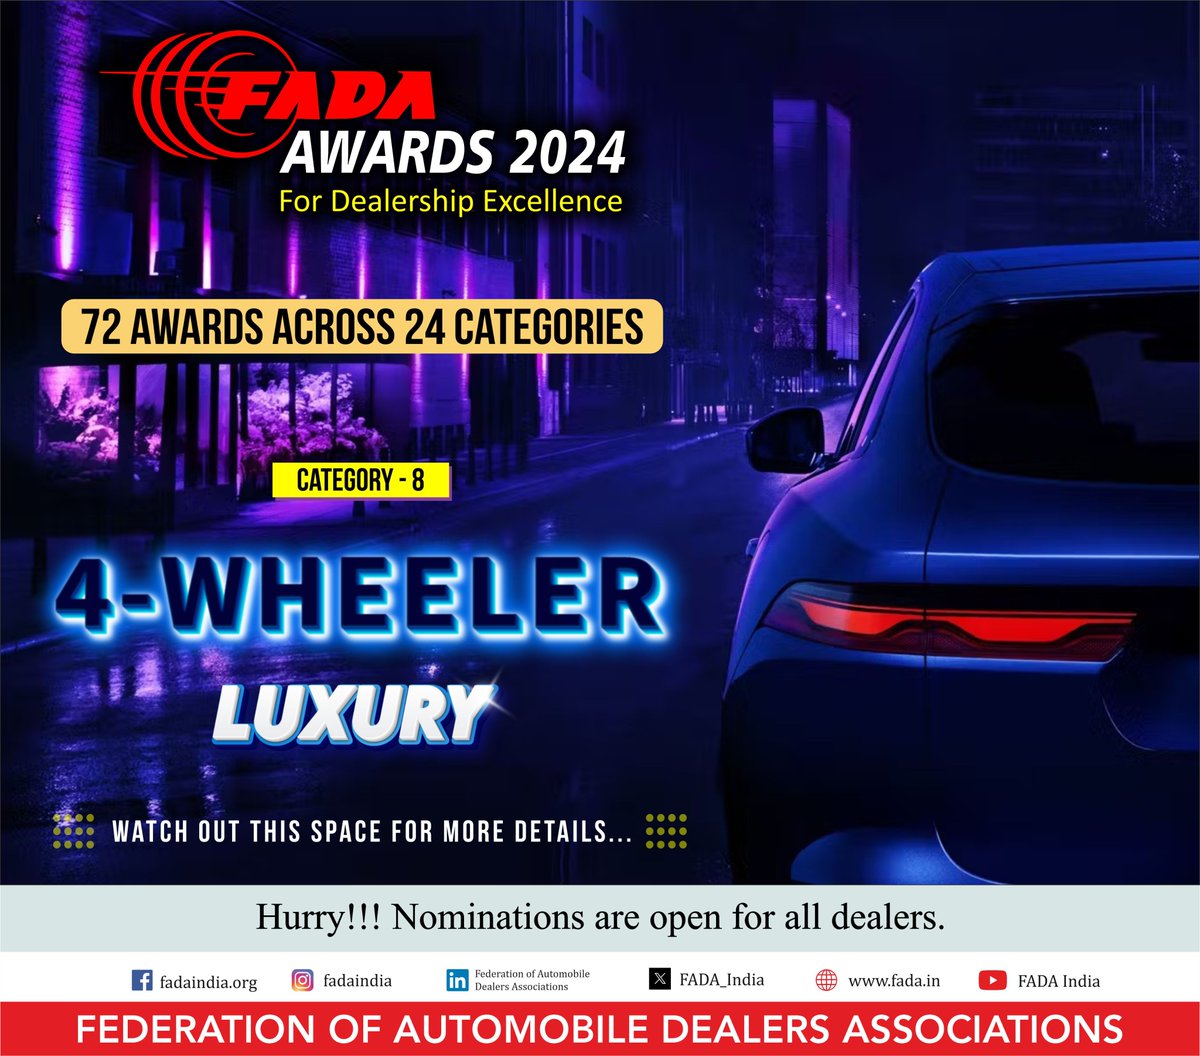 Rev your engines and rush in! 🏎️

The gates are open for nominations of the FADA Dealership Excellence Awards in the thrilling 4-Wheeler Luxury category! 

Submit your nominations now at: fada.in/event-details.… 

#FADA #ONOA #FADAAwards2024 #AutomobileExcellence #NominationsOpen